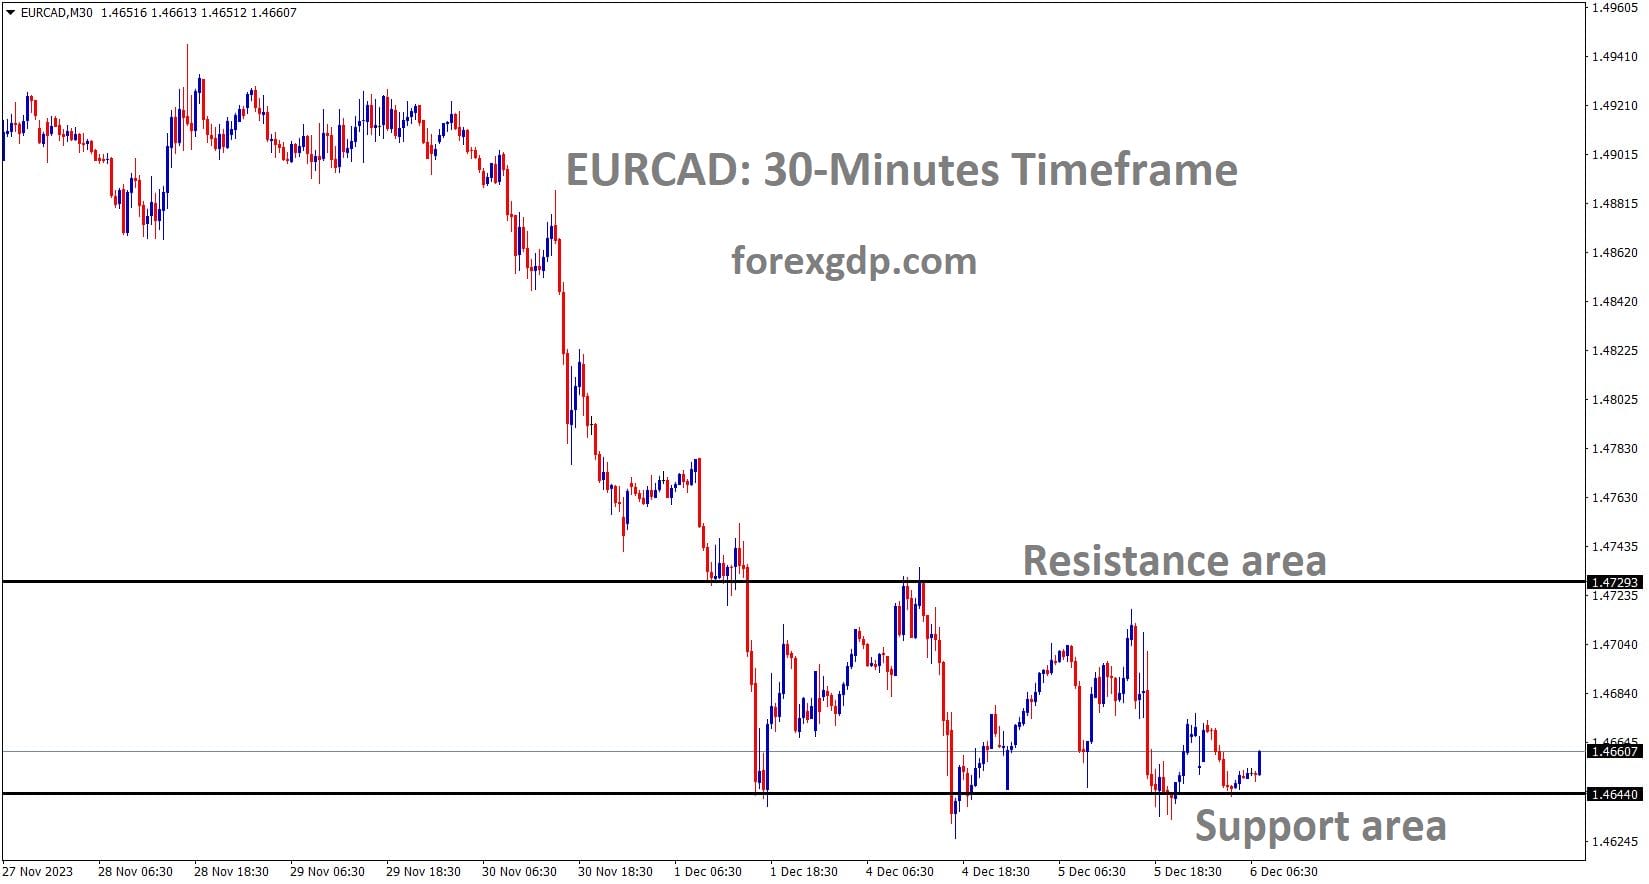 EURCAD is moving in the Box pattern and the market has rebounded from the support area of the pattern